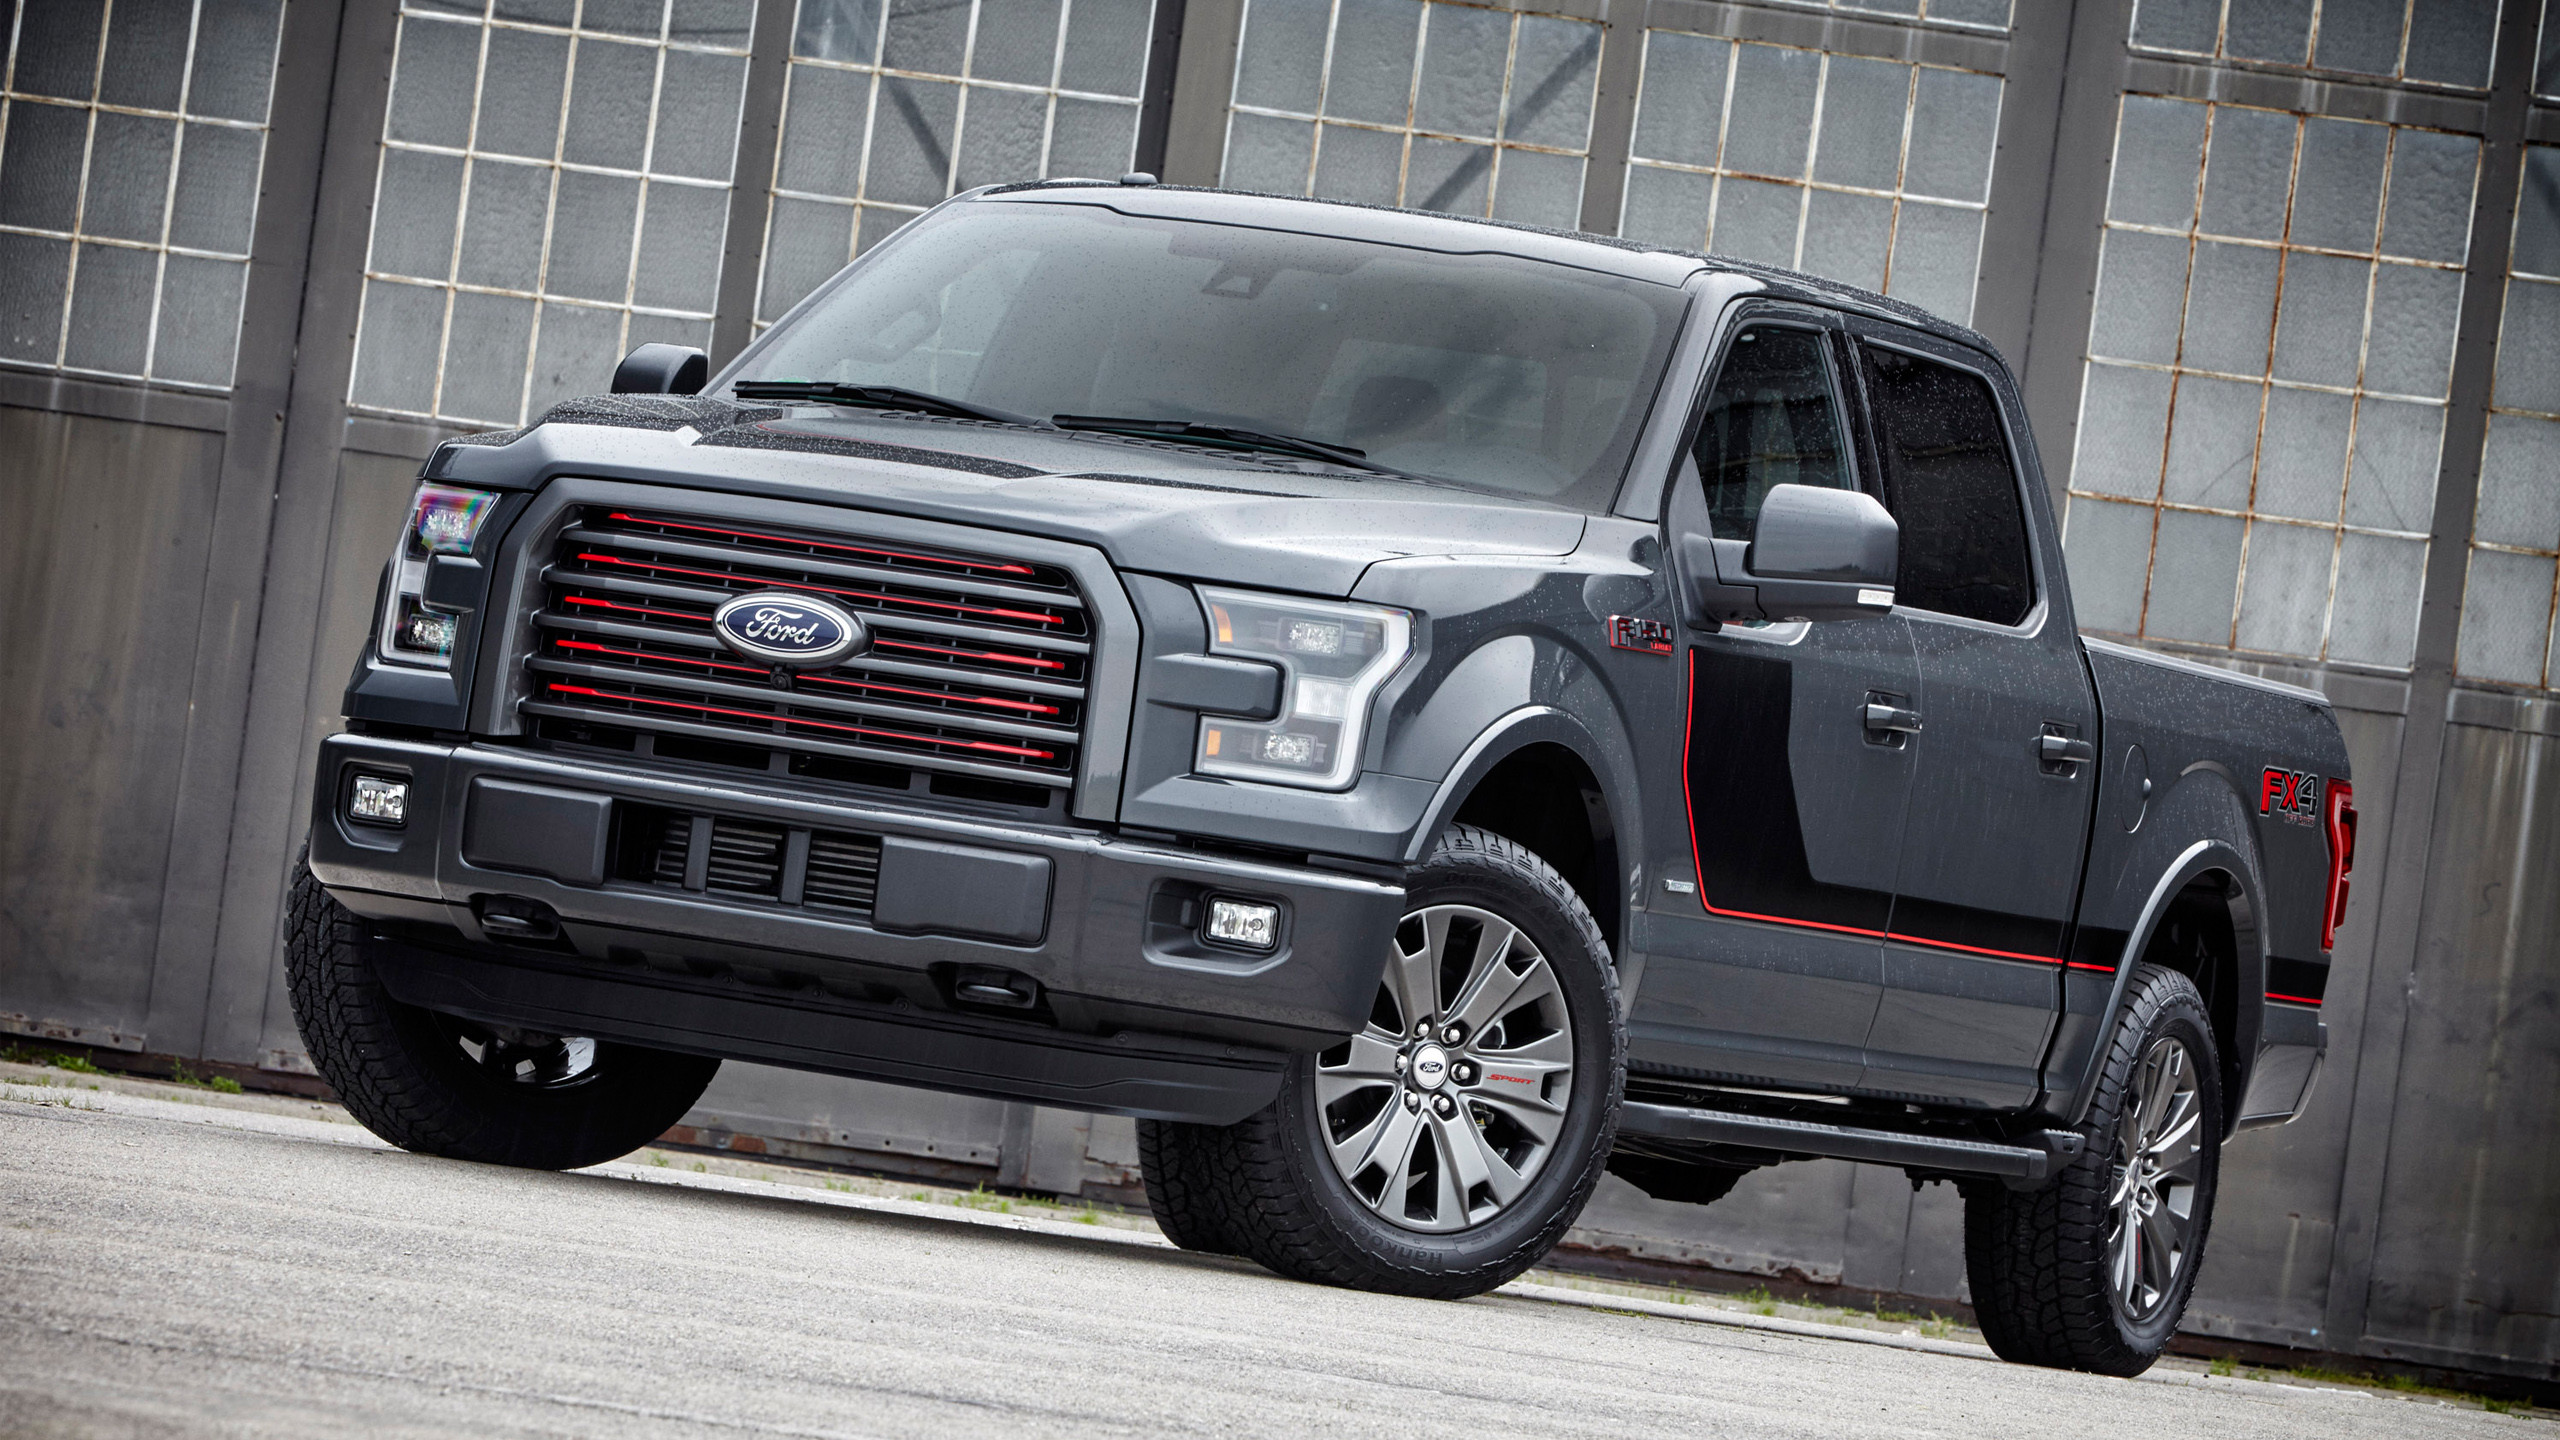 2560x1440 Wallpapers Of The Day: Ford Truck px Ford Truck Wallpapers 1280Ã1024 F150  Wallpapers